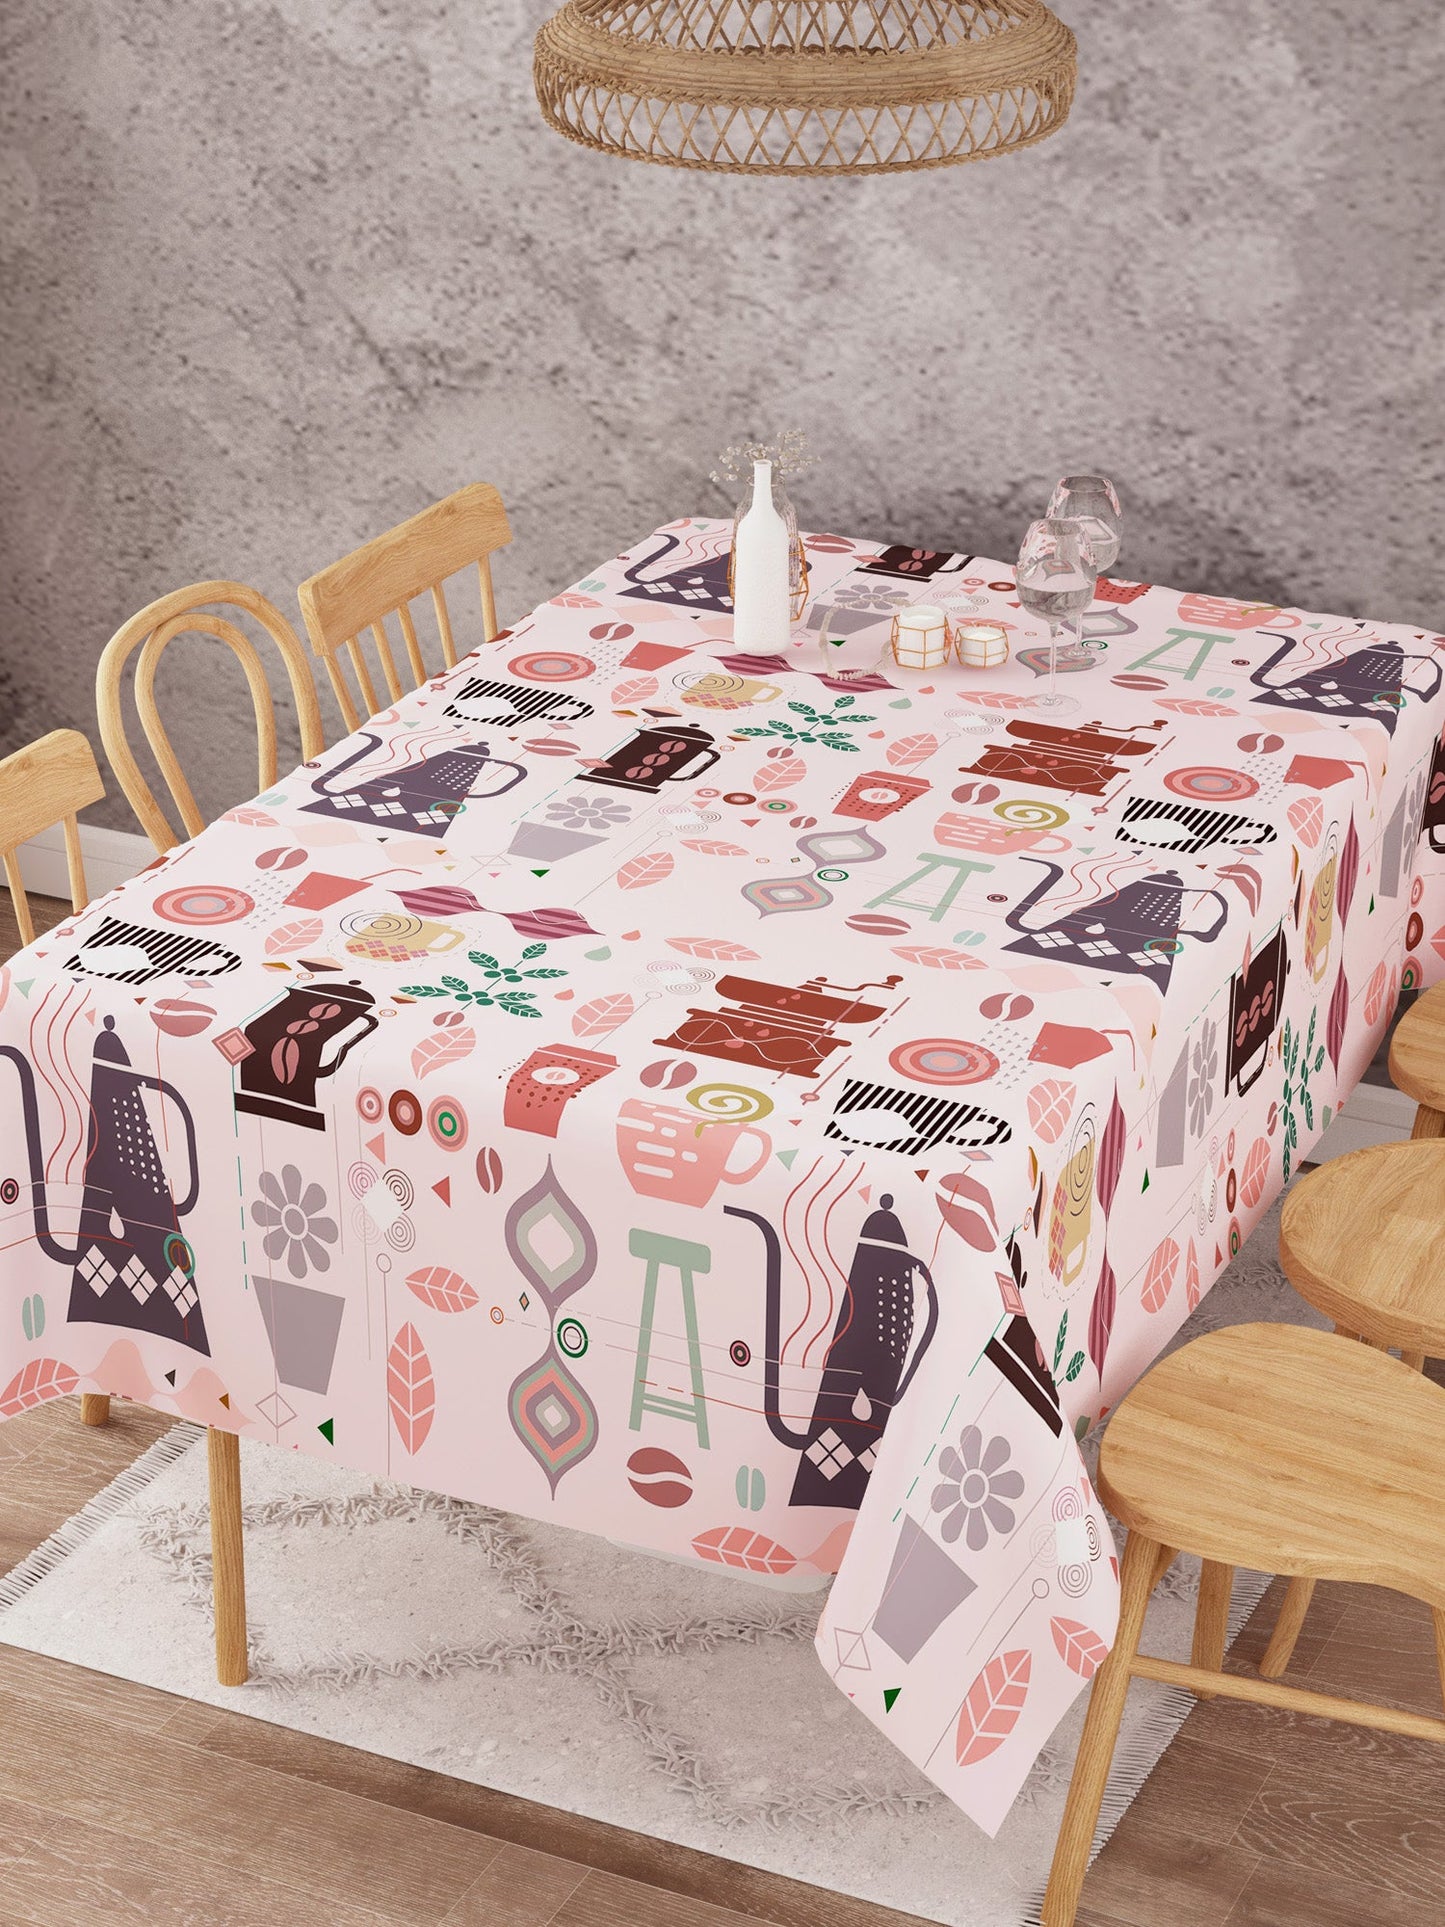 Teaster Printed Peach Colored Cotton Table Cover